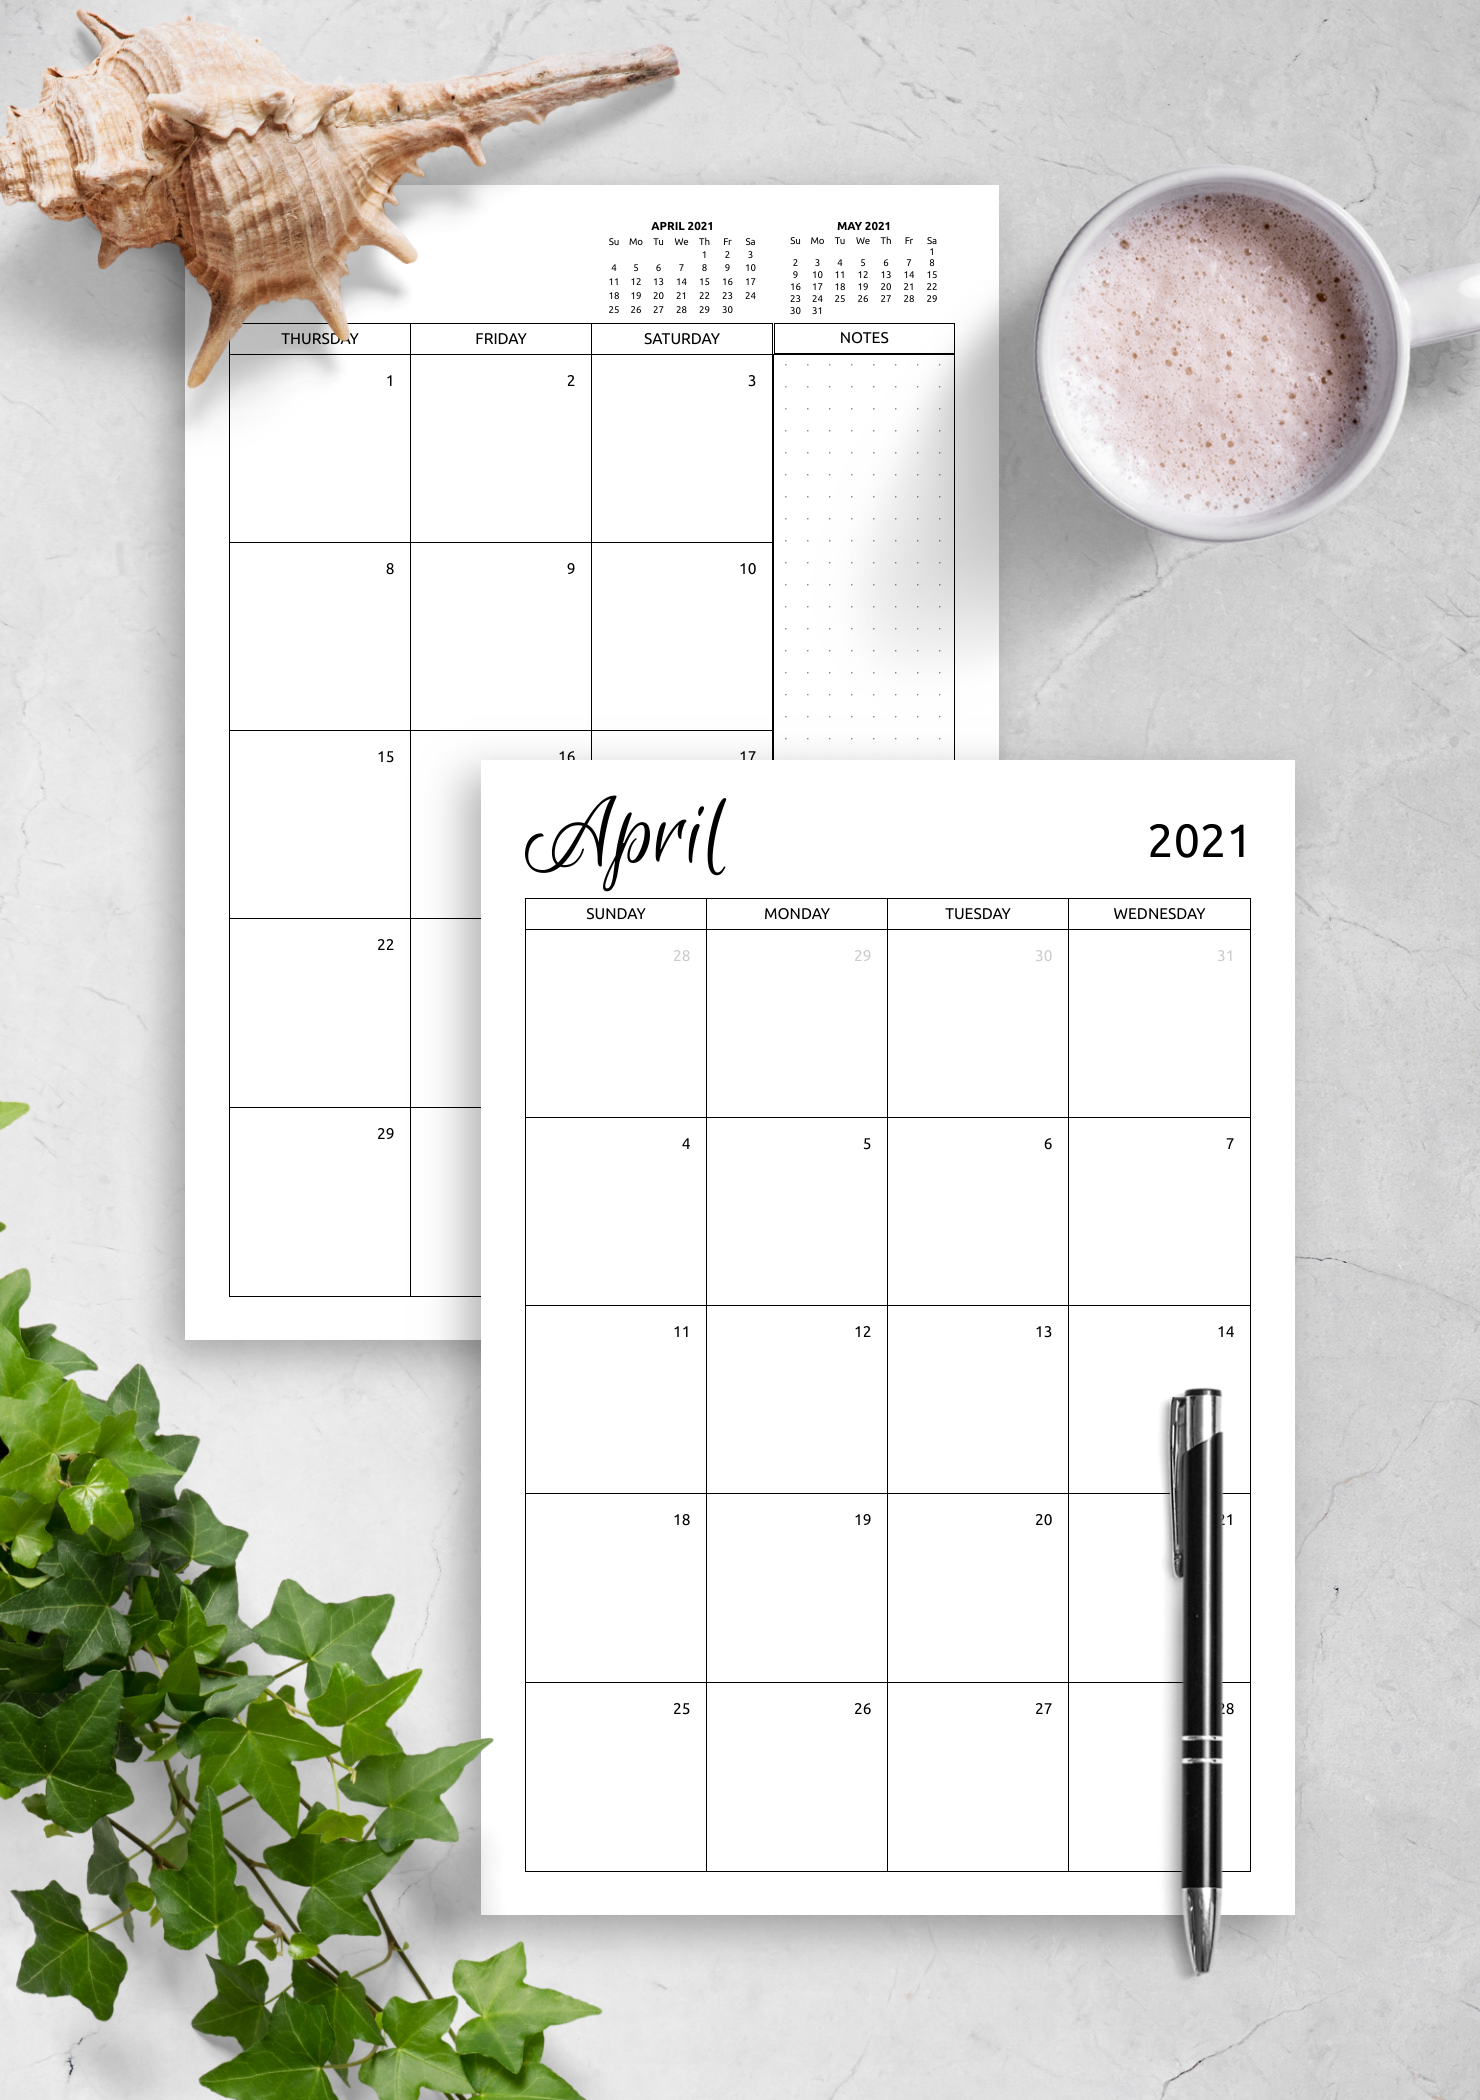 calendar template with notes section 48